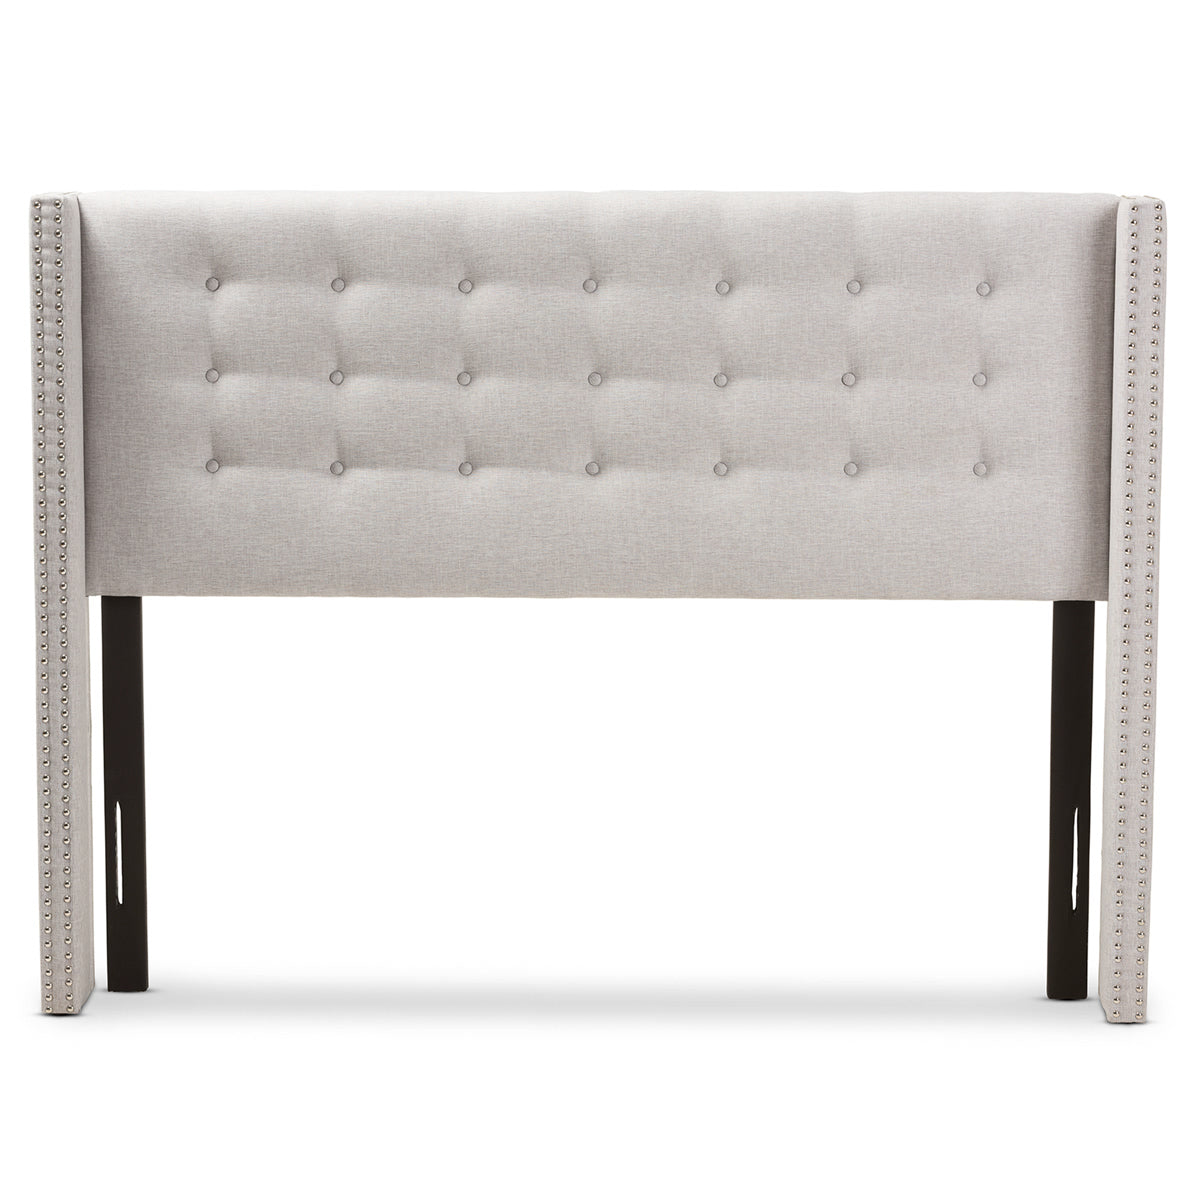 Baxton Studio Ginaro Modern And Contemporary Greyish Beige Fabric Button-Tufted Nail head Queen Size Winged Headboard Baxton Studio-Queen Headboard-Minimal And Modern - 3